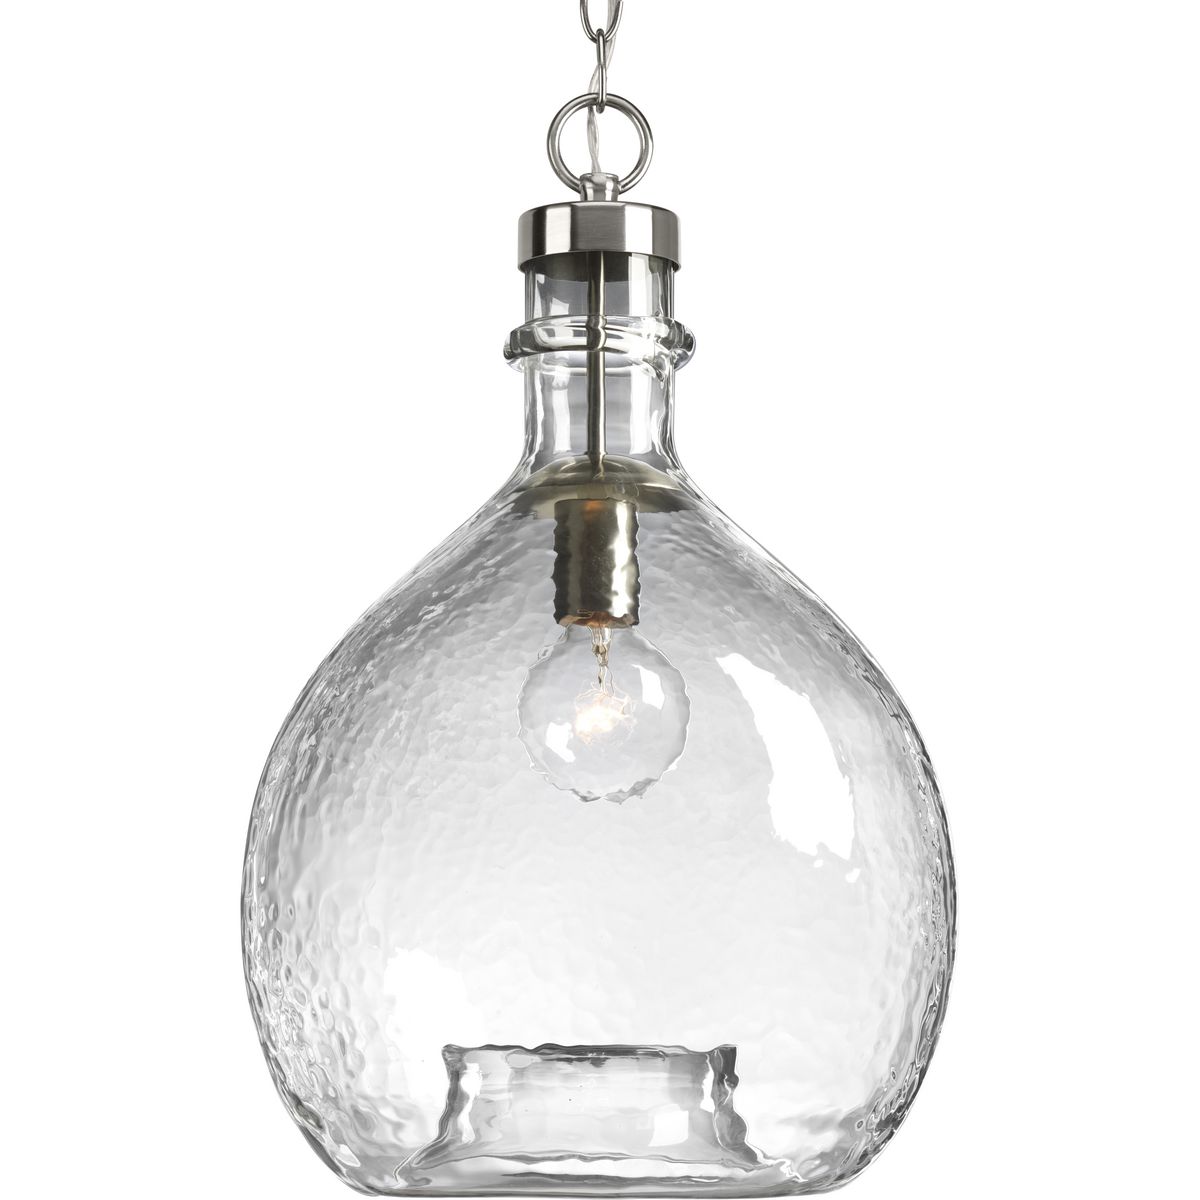 Inspired by a beautiful wine cask design, the Zin pendants are artfully formed from one large piece of glass. The one-light pendant has a Brushed Nickel finish with solid, textured clear glass. Create a customized look for Rustic Farmhouse and Modern Farmhouse to Urban Industrial settings by grouping several pendants together in a kitchen, entryway or living room setting. Perfectly imperfect, the design offers dimension and visual texture.